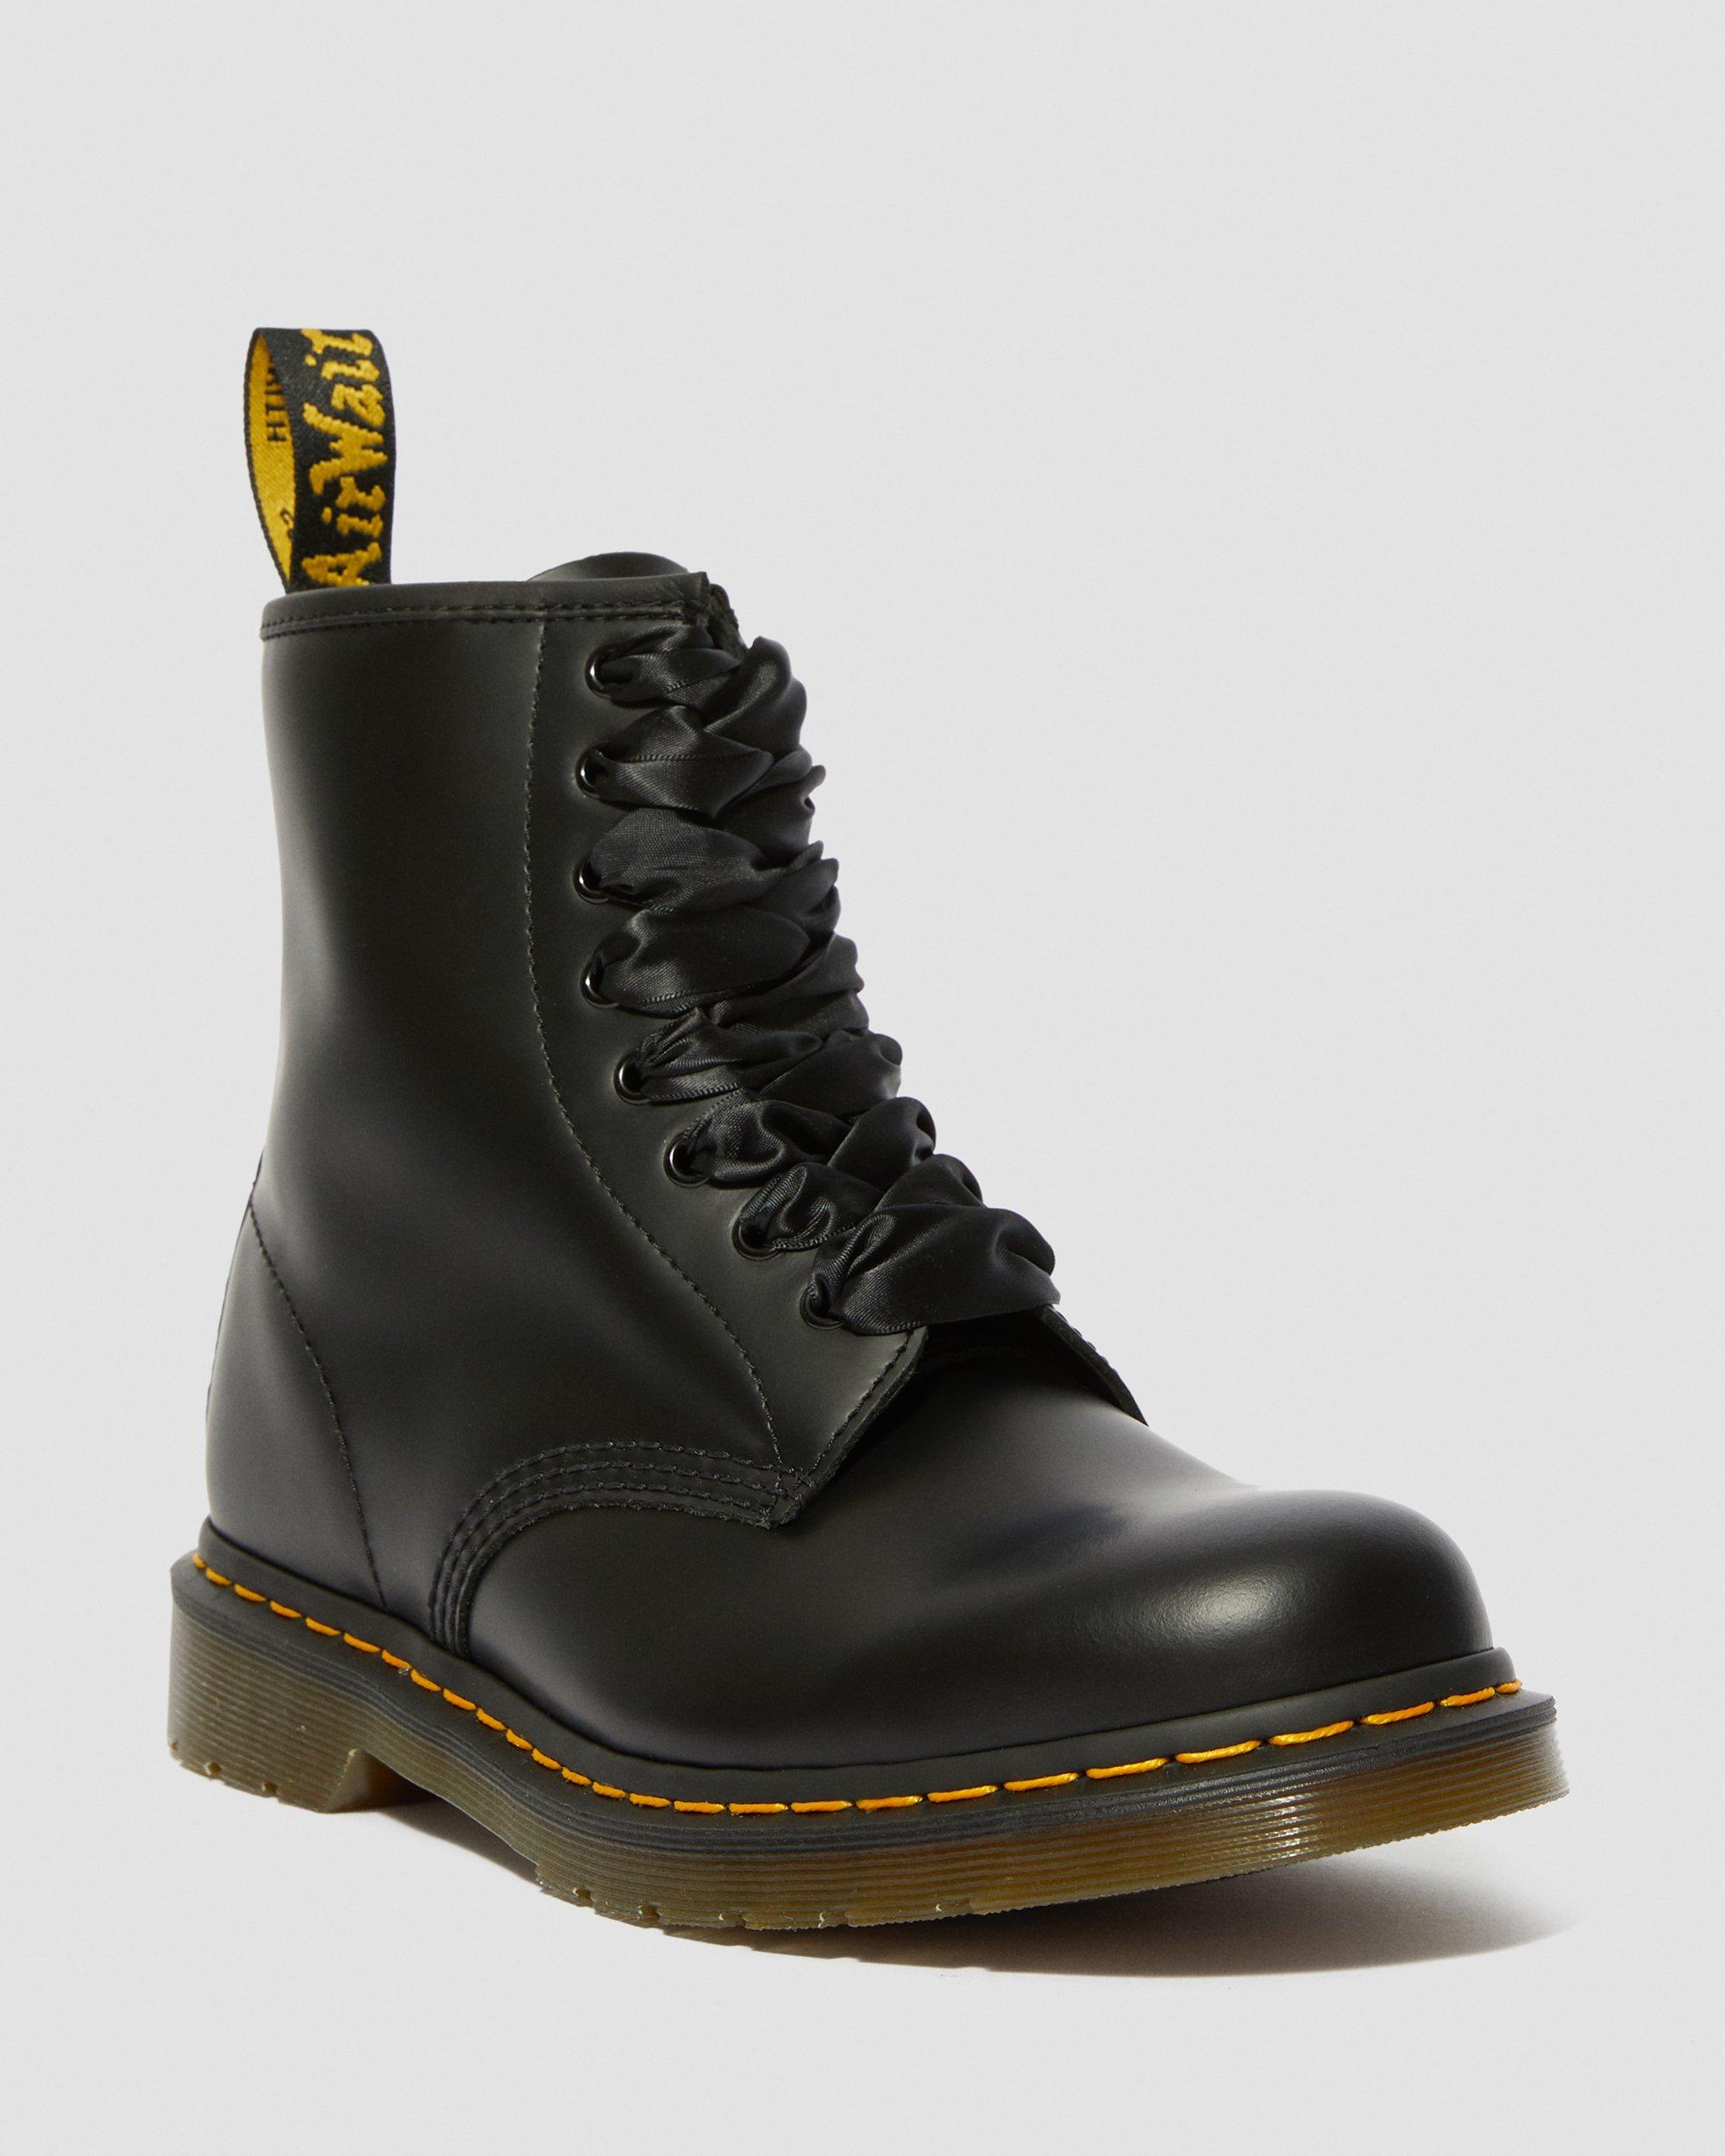 1460 Snake Print Emboss Leather Lace Up Boots, Black | Dr. Martens